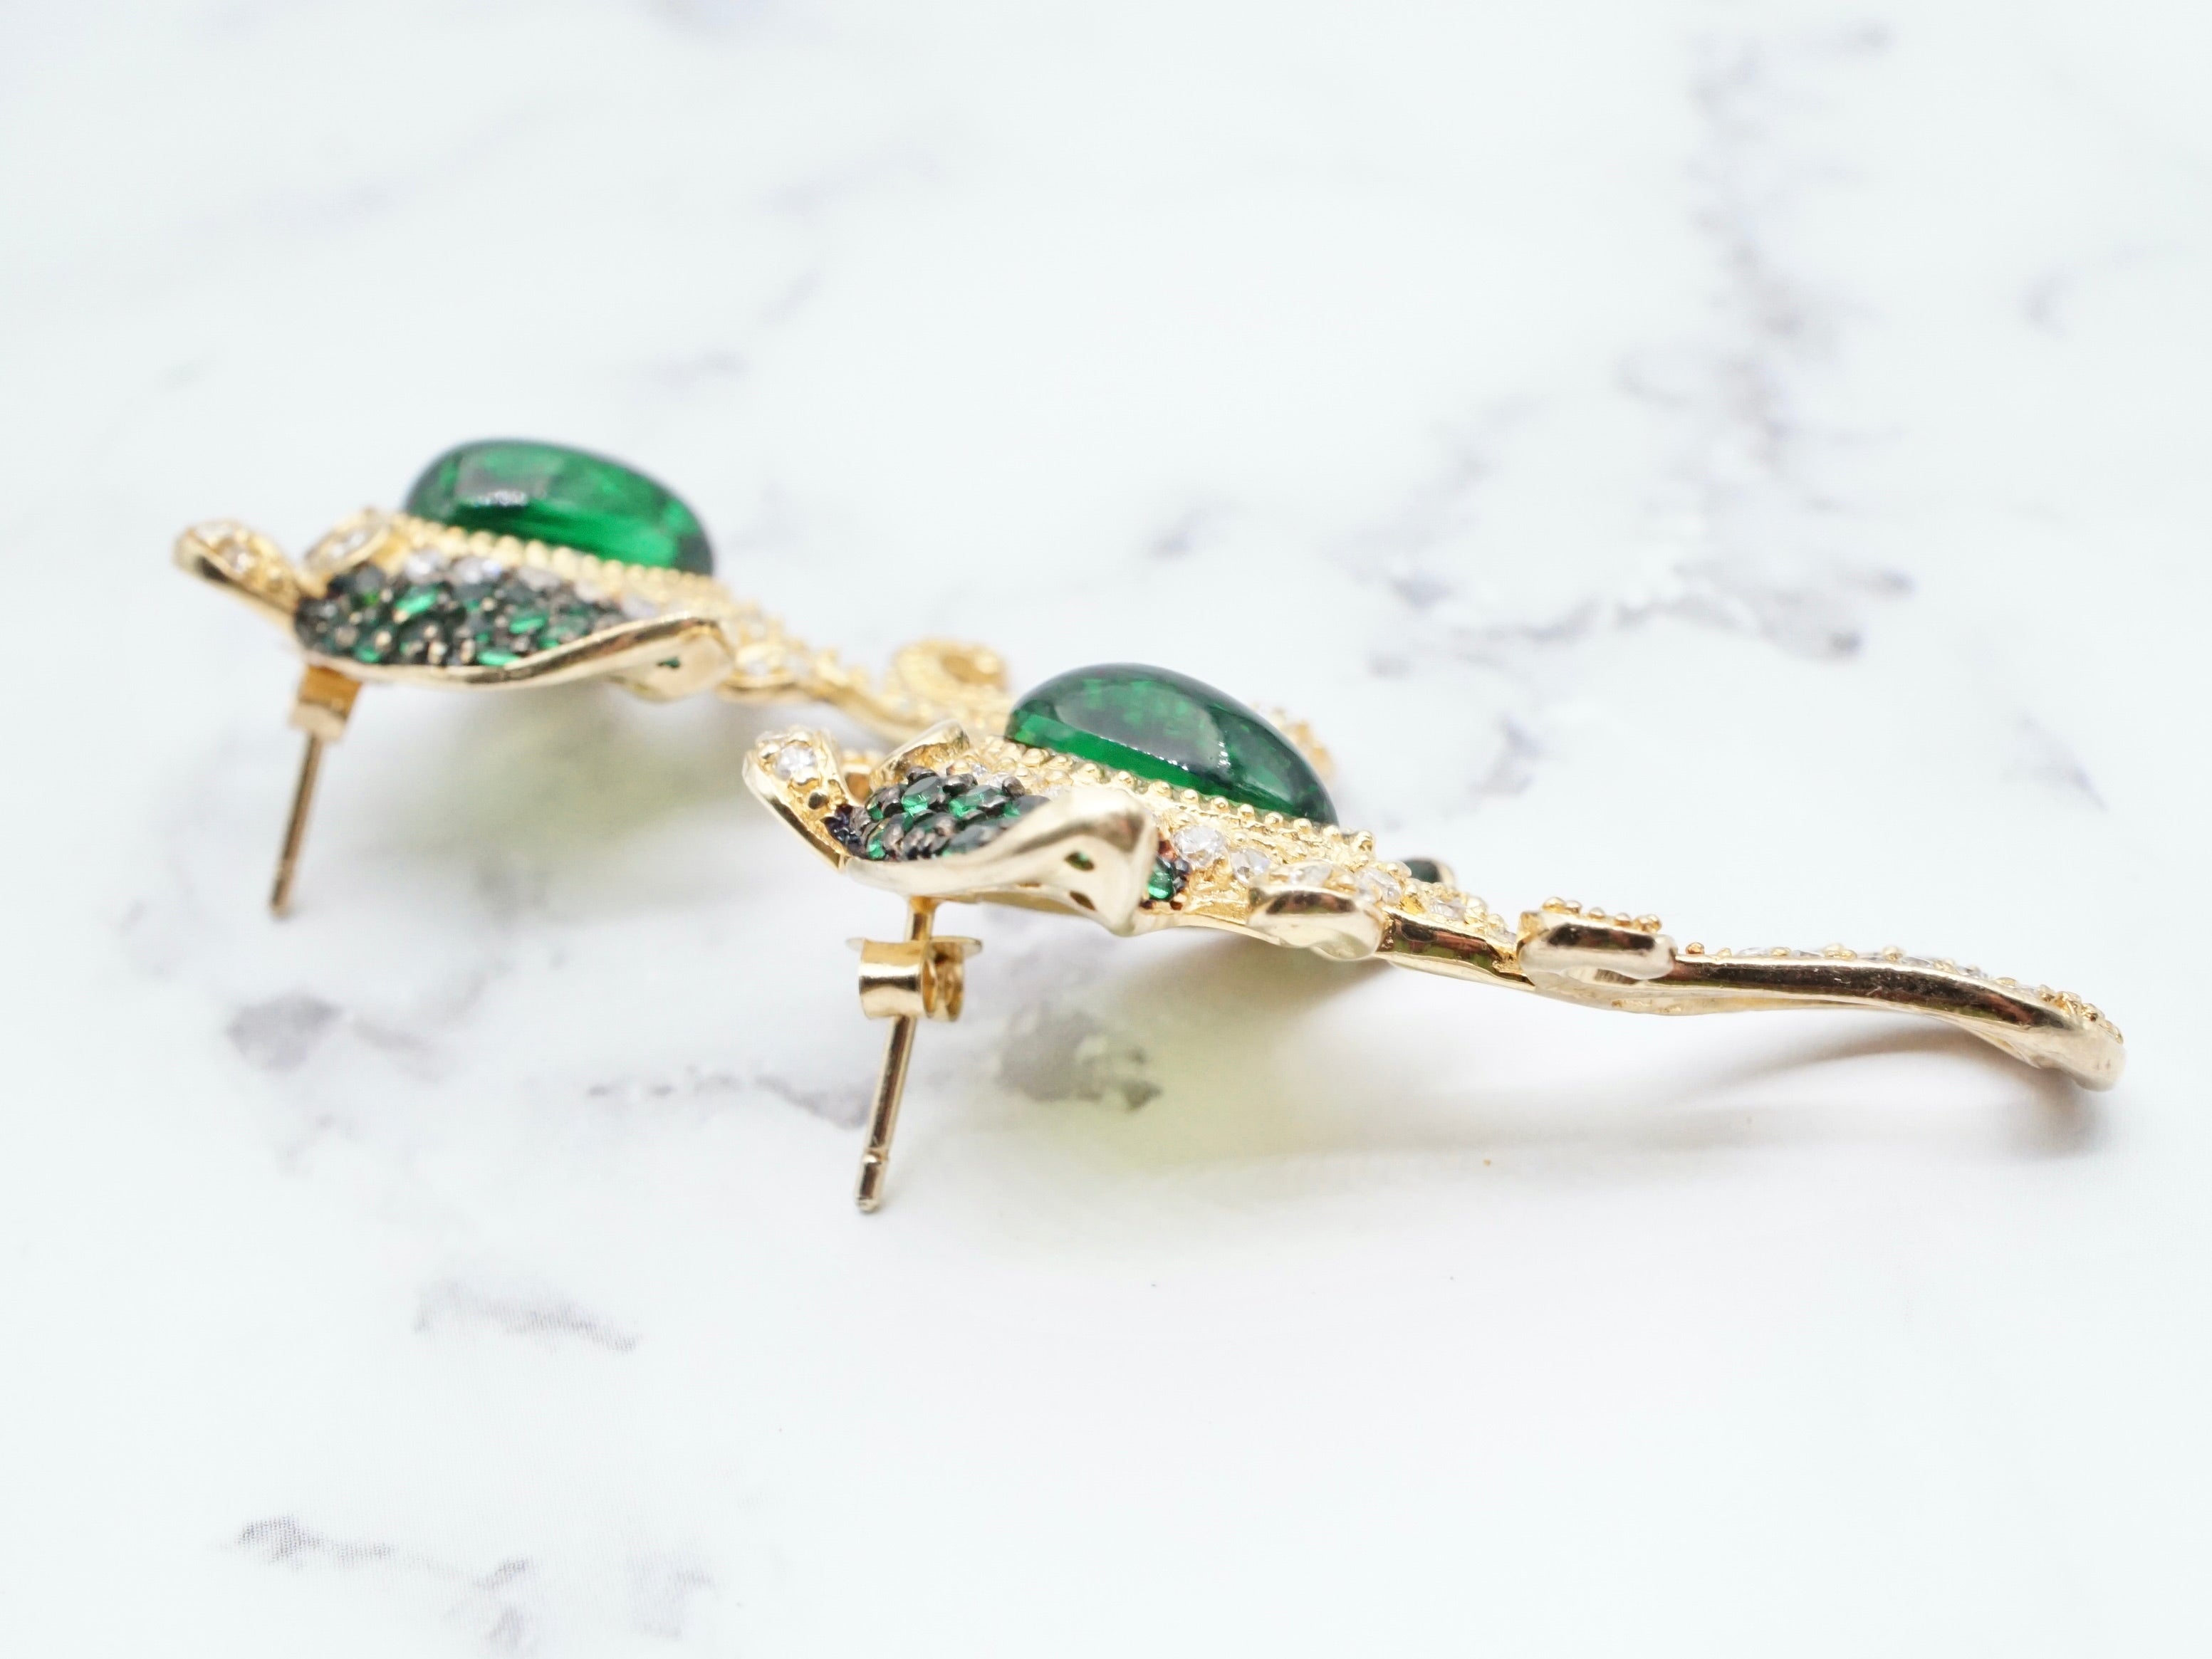 Vintage gold plated sterling and Swarovski crystal stingray earrings